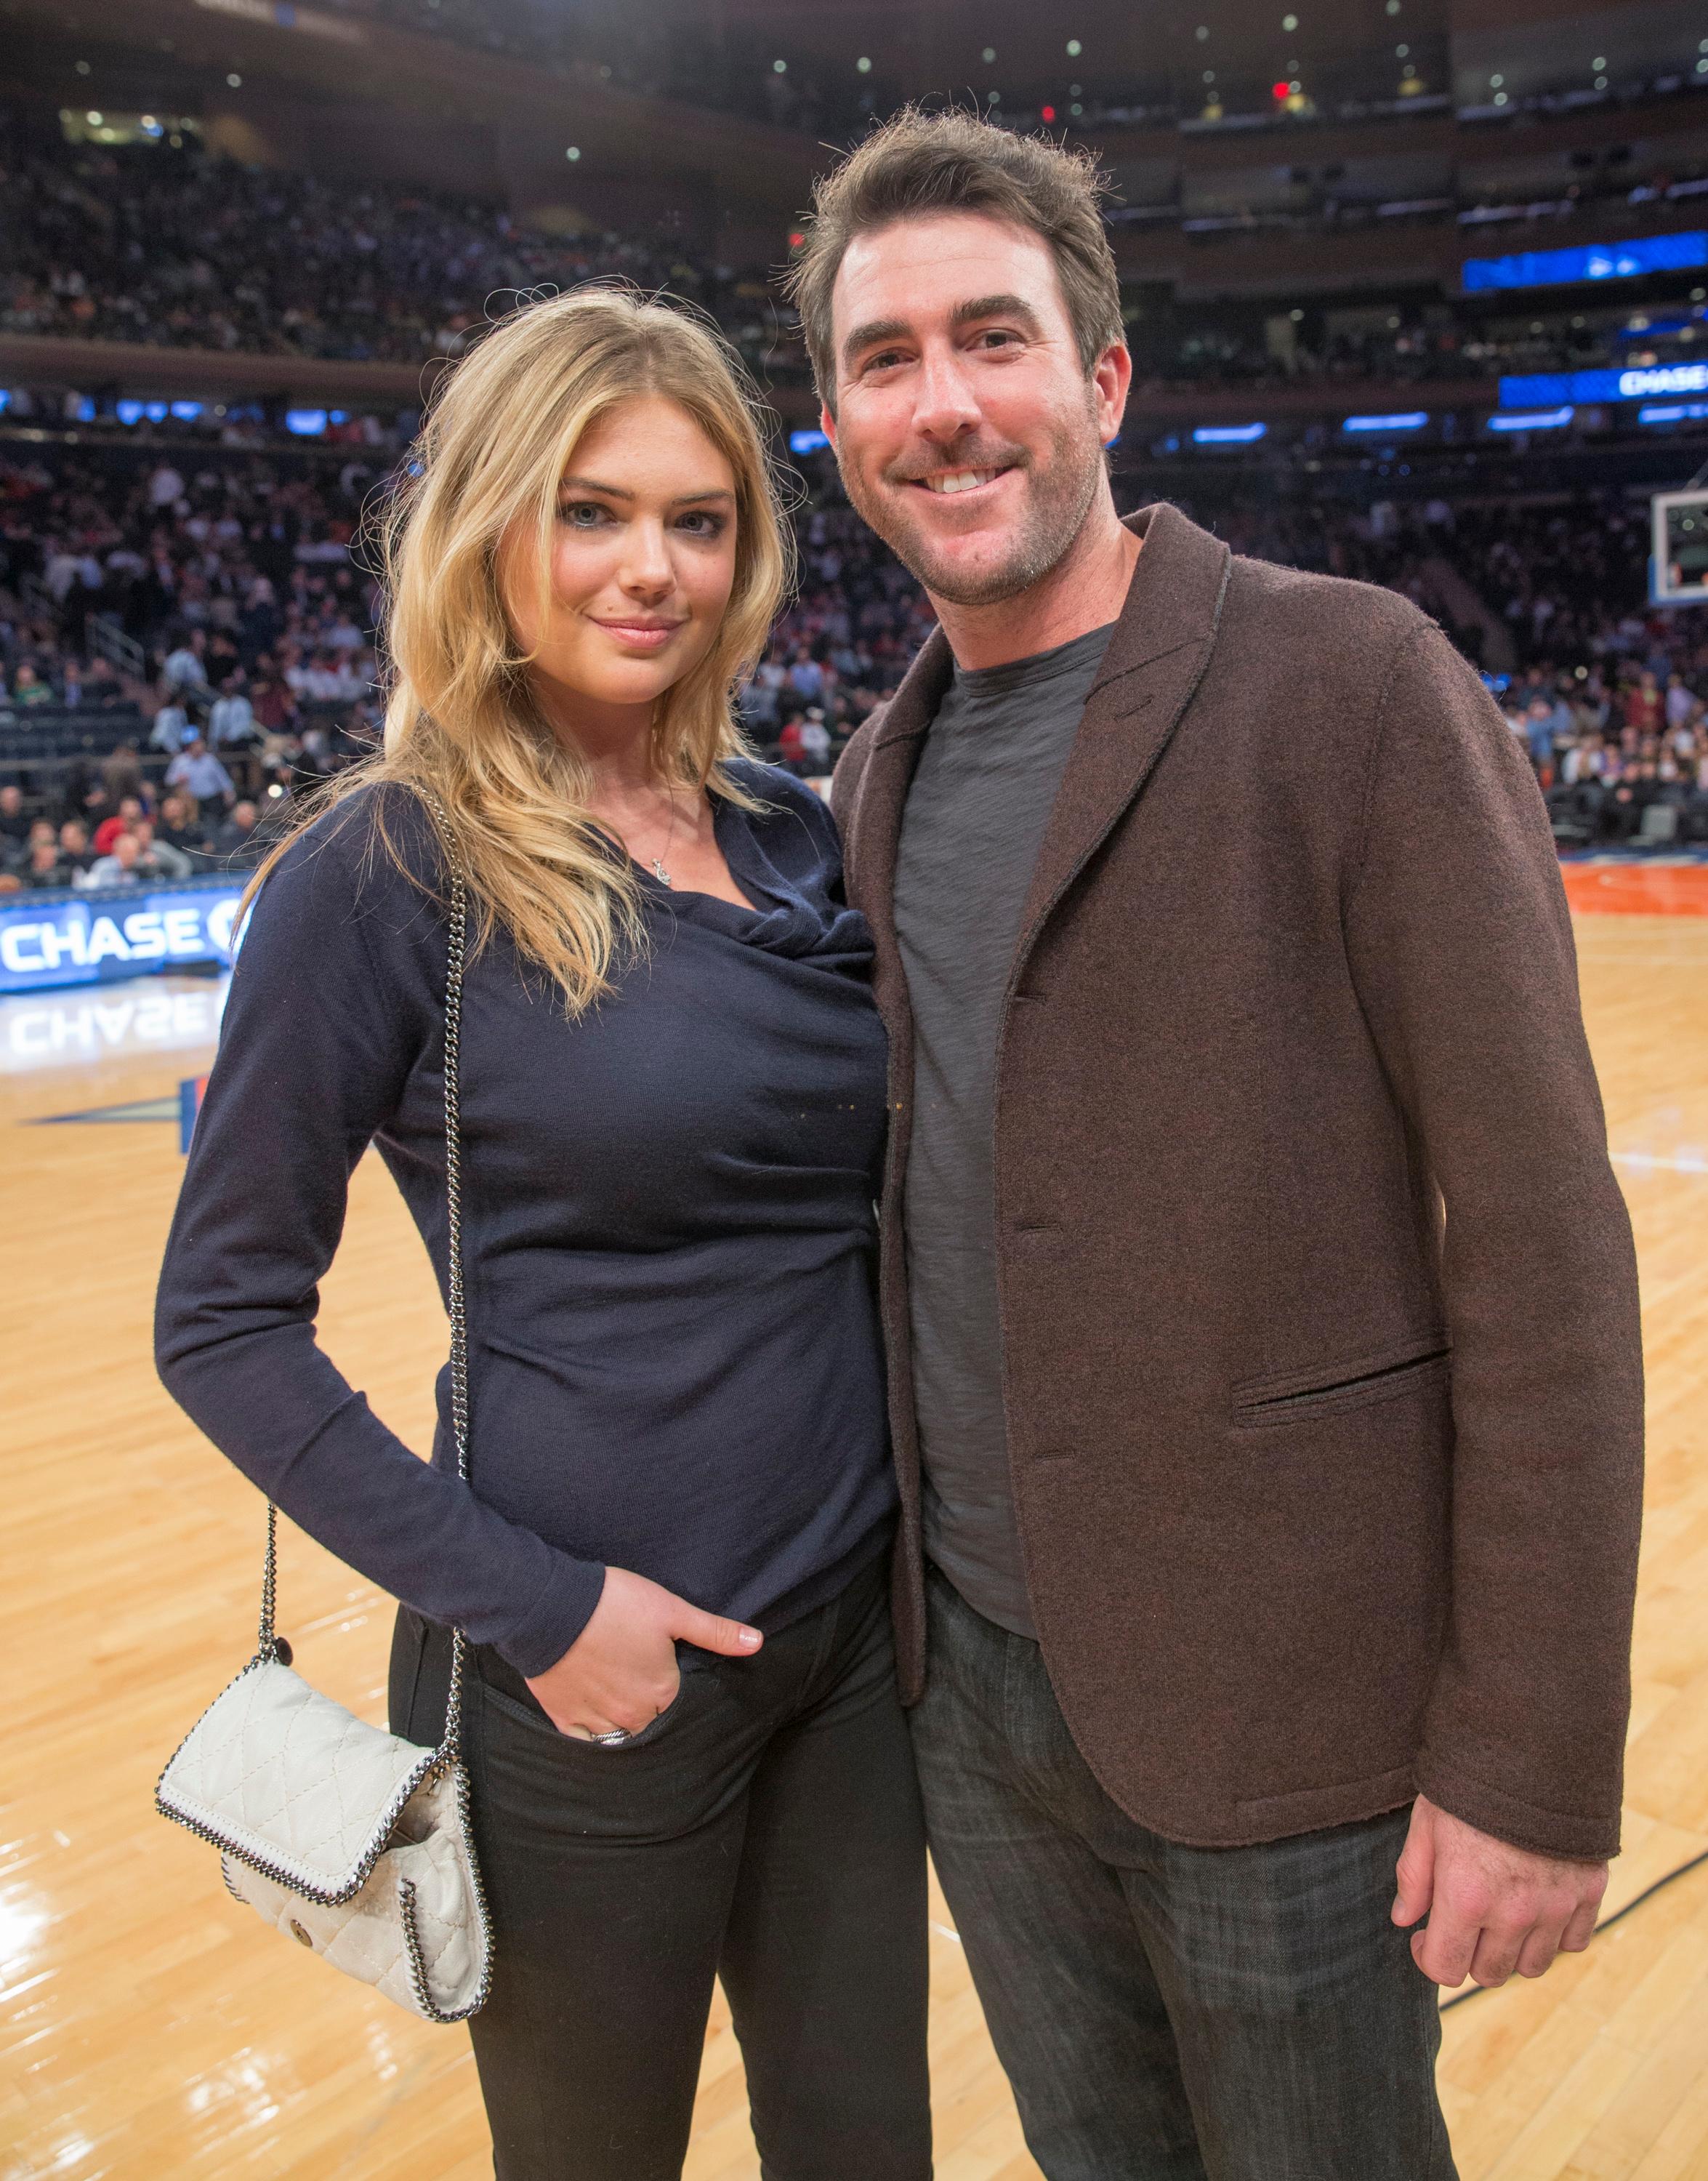 Kate Upton and boyfriend Justin Verlander sit court side at Madison Square Garden as they attend the NY Knicks game